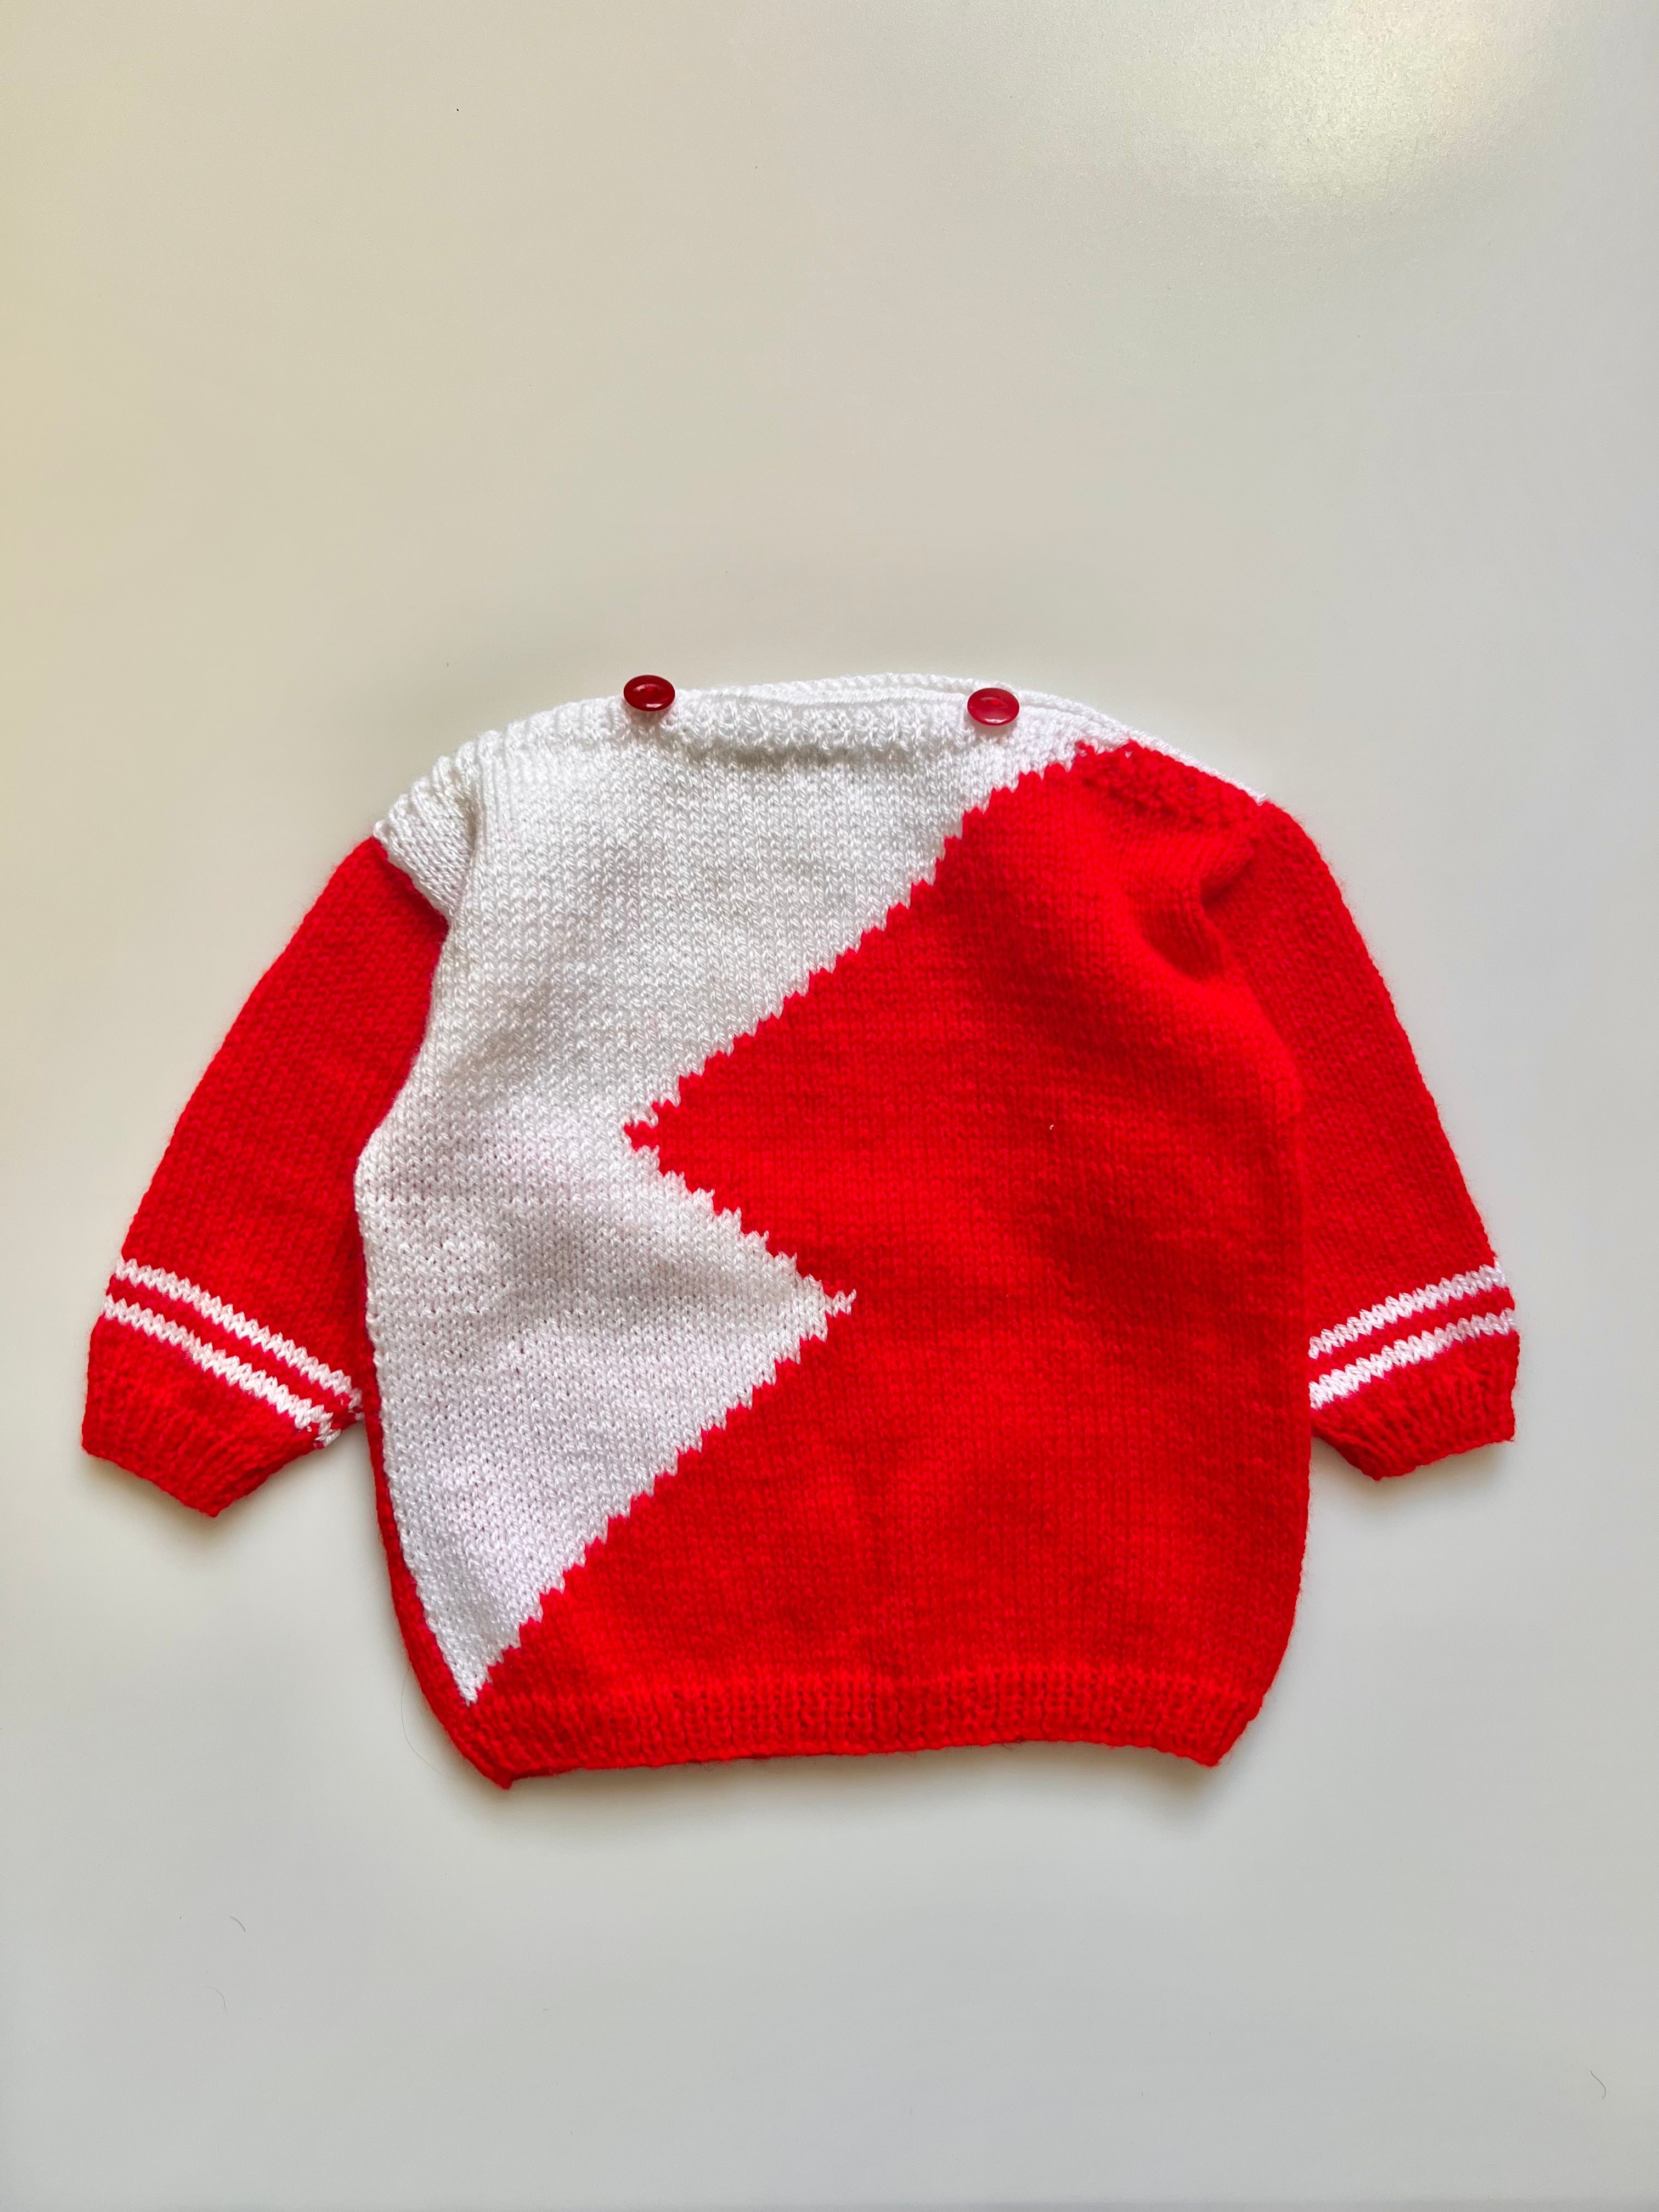 Hand Knitted Red Zig Zag Jumper Age 2-3